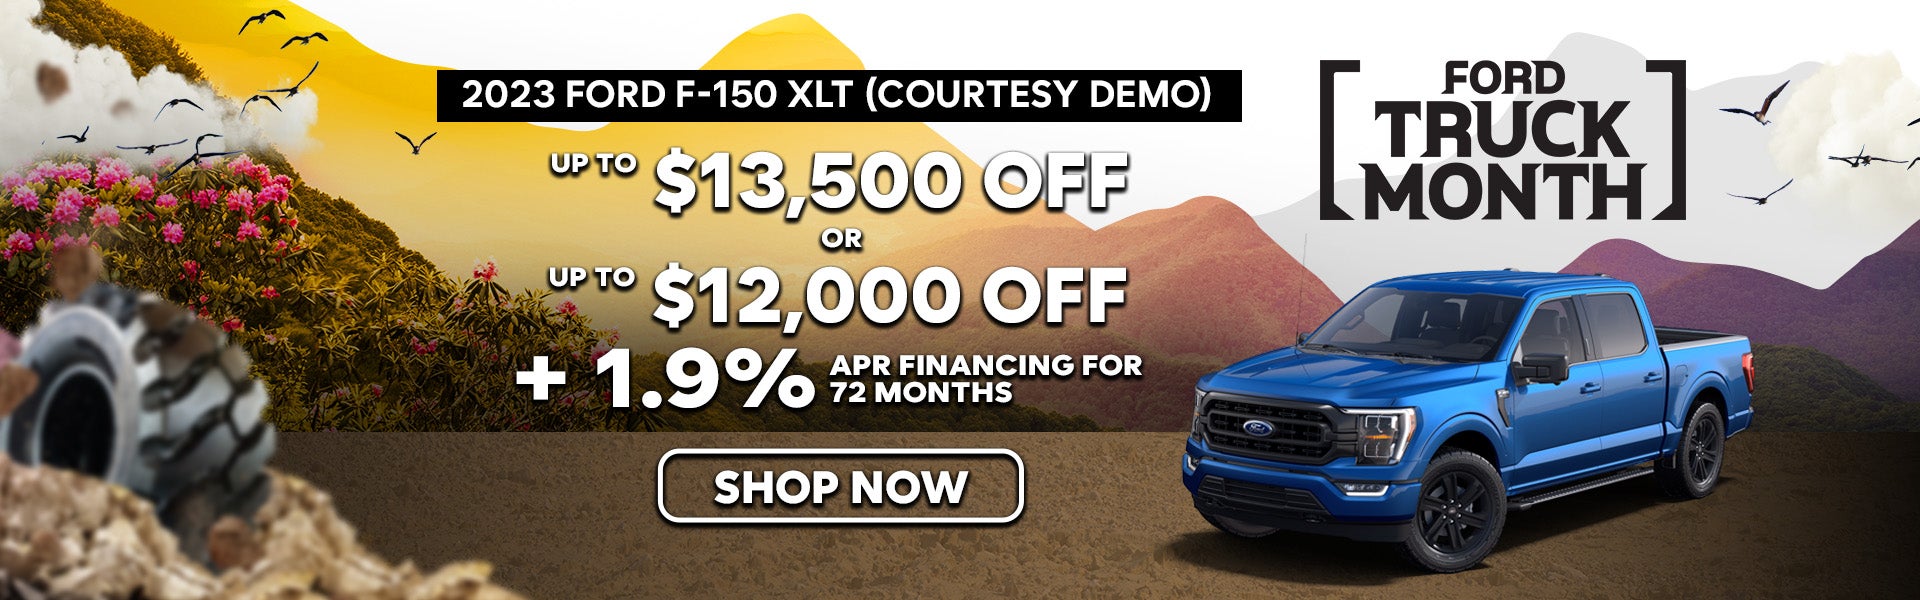 2023 Ford F-150 XLT Special Offer